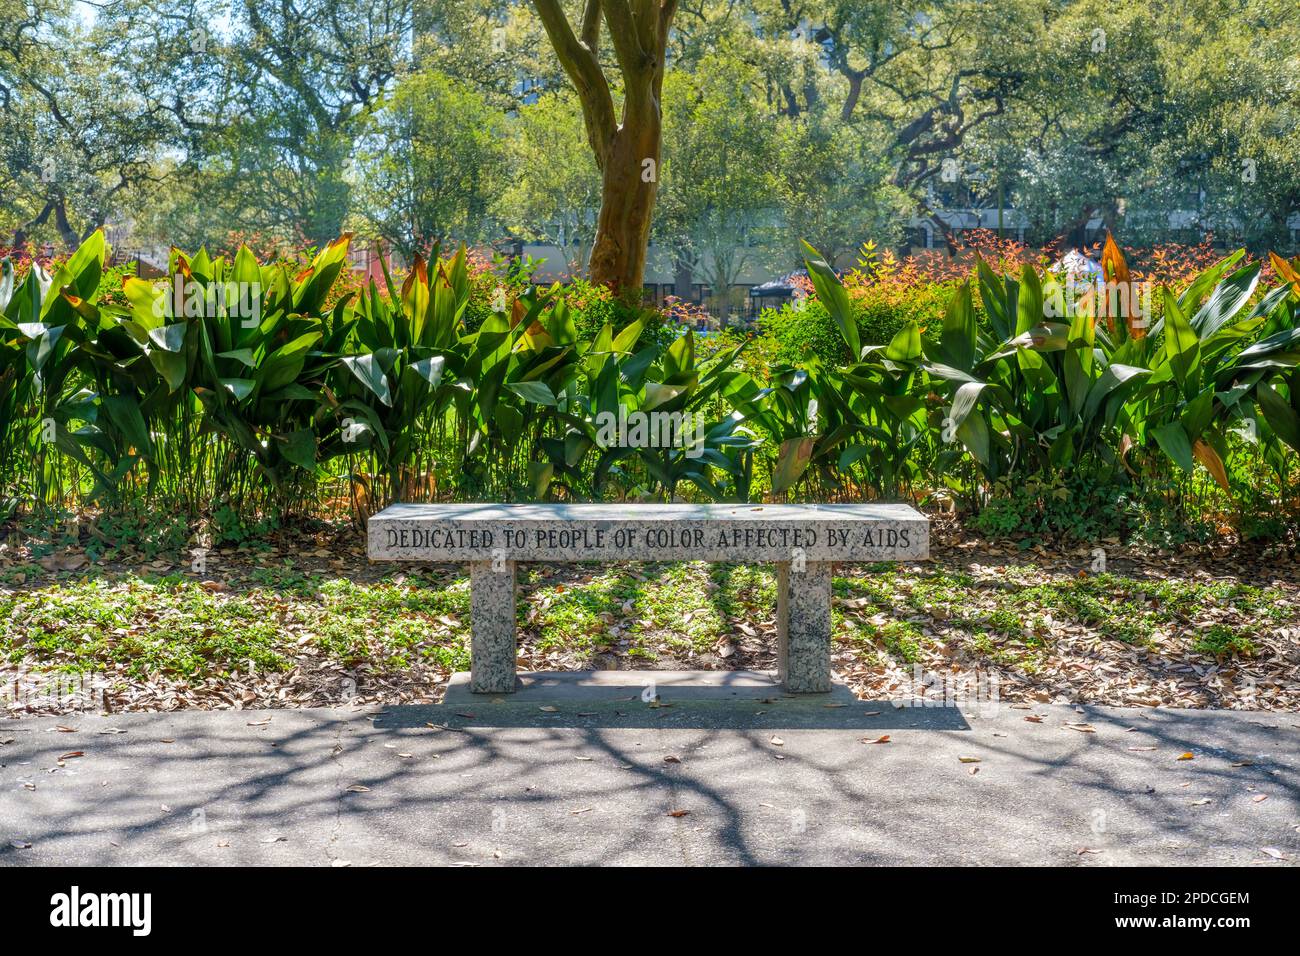 NEW ORLEANS, LA, USA - MARCH 5, 2023: Park Bench in Ellis Marsalis Square inscribed with 'Dedicated to People of Color Affected by AIDS' Stock Photo